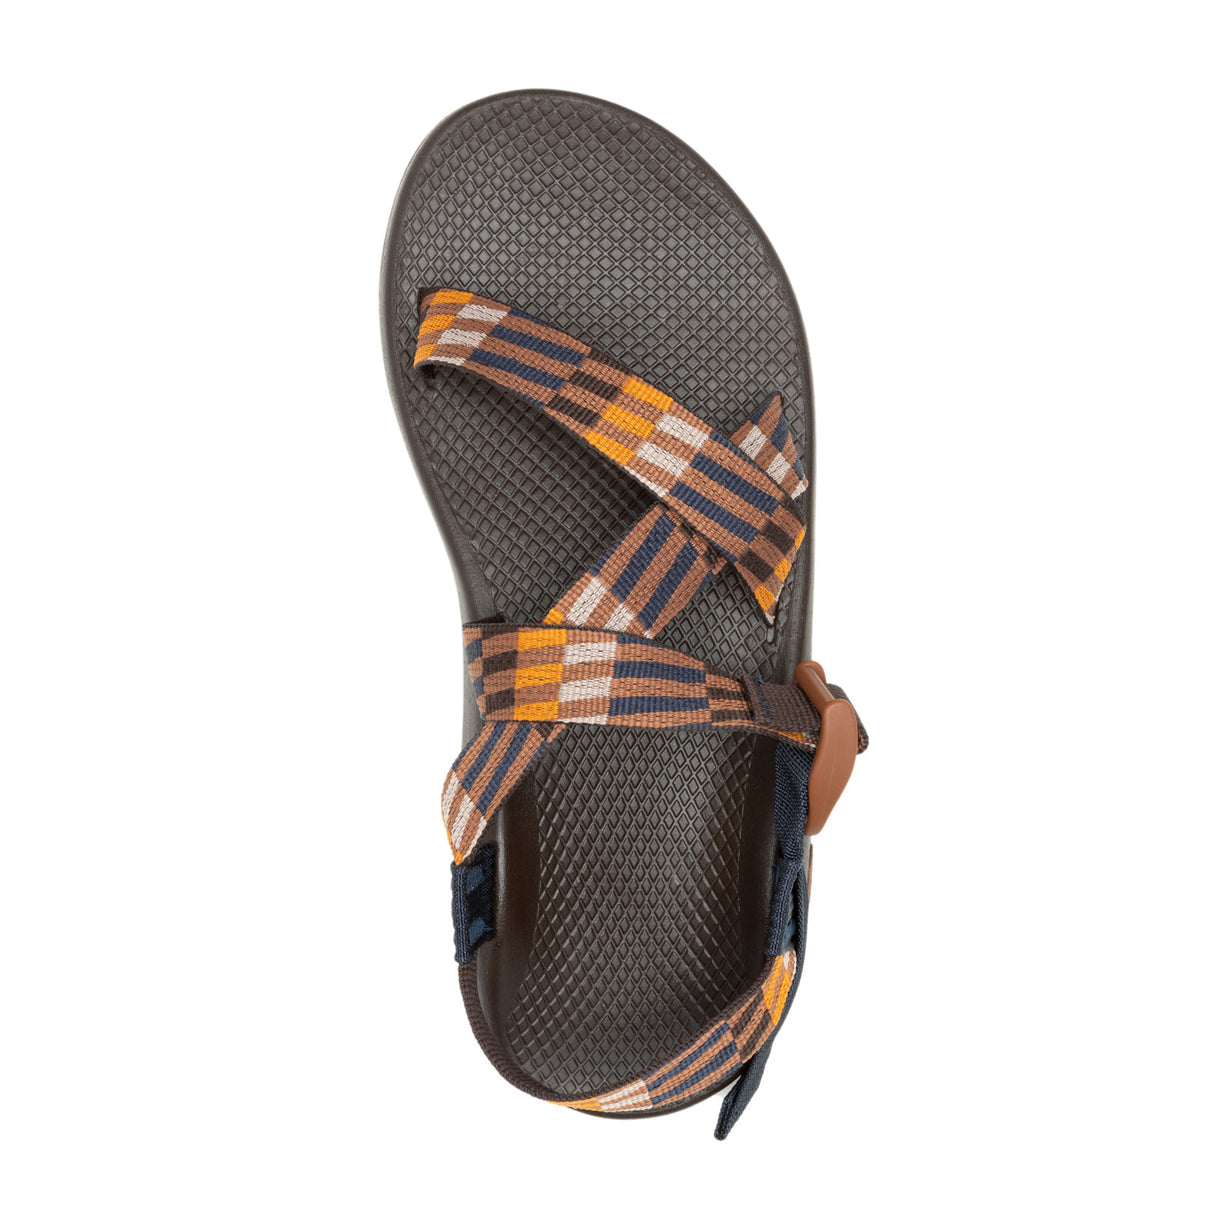 Chaco Z/1 Classic Sandal (Men) - Deco Nutshell Sandals - Active - The Heel Shoe Fitters